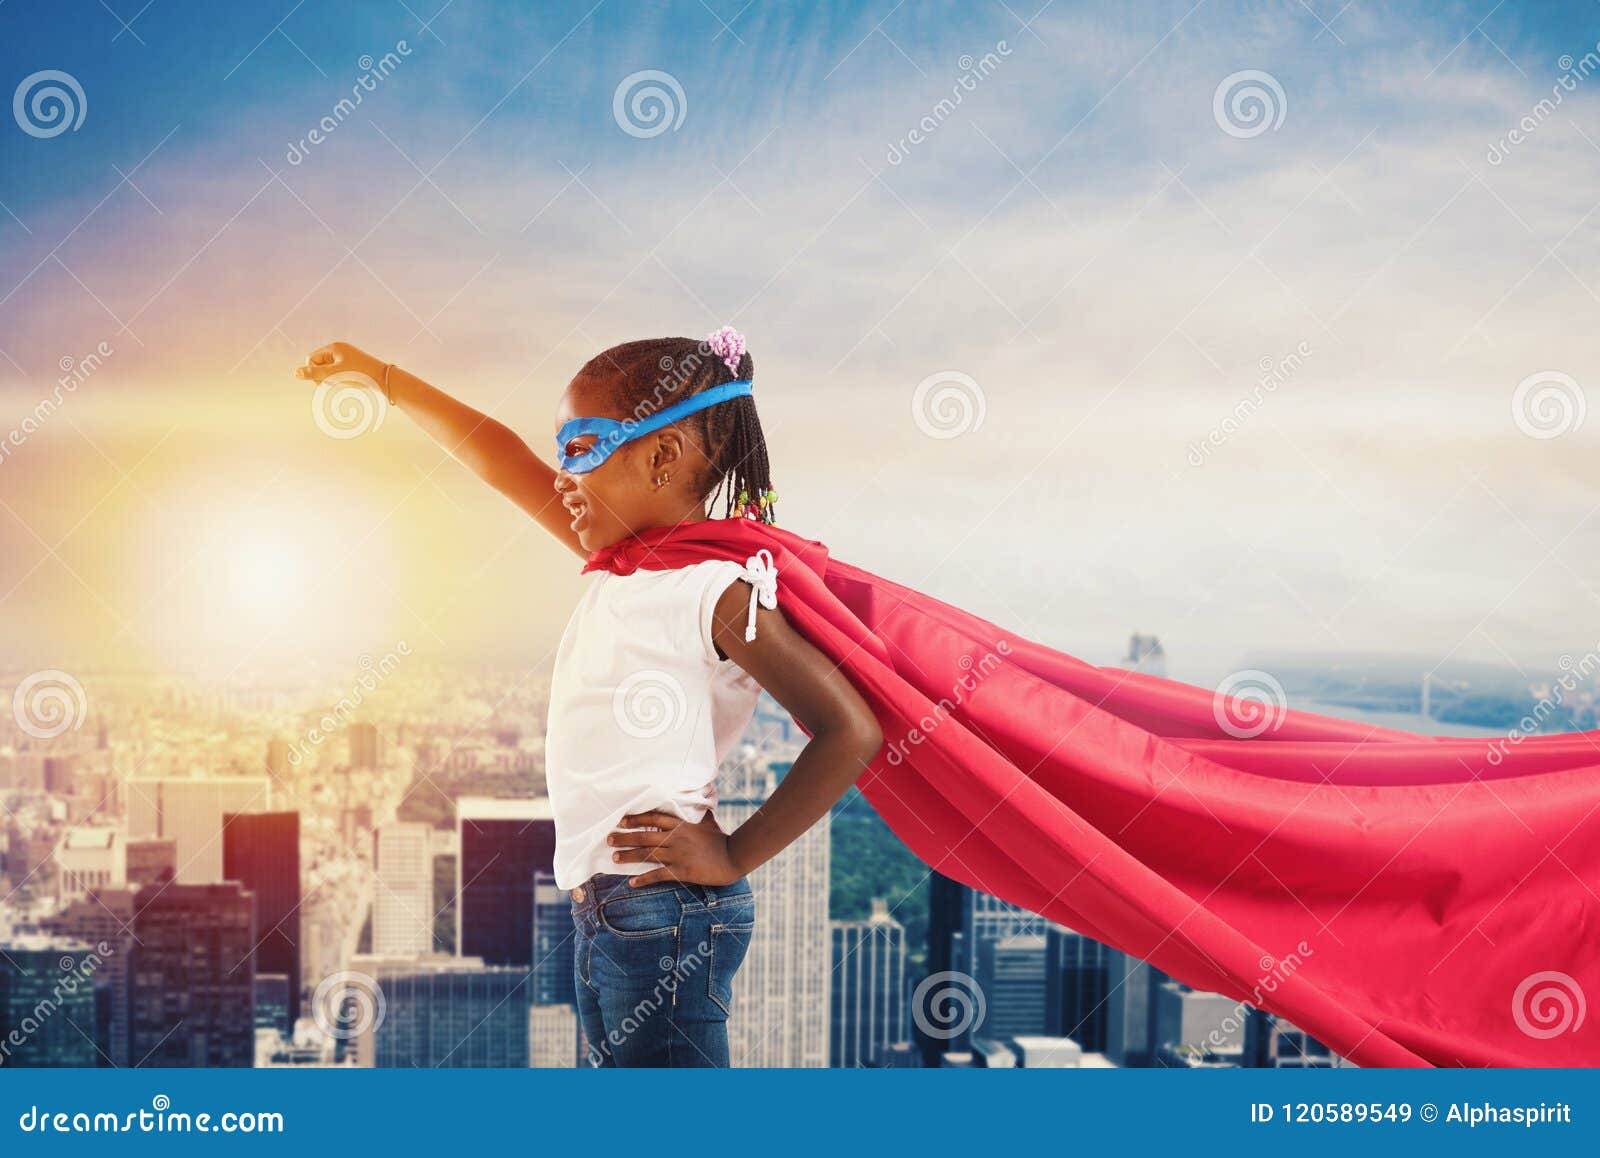 child acts like a superhero to save the world